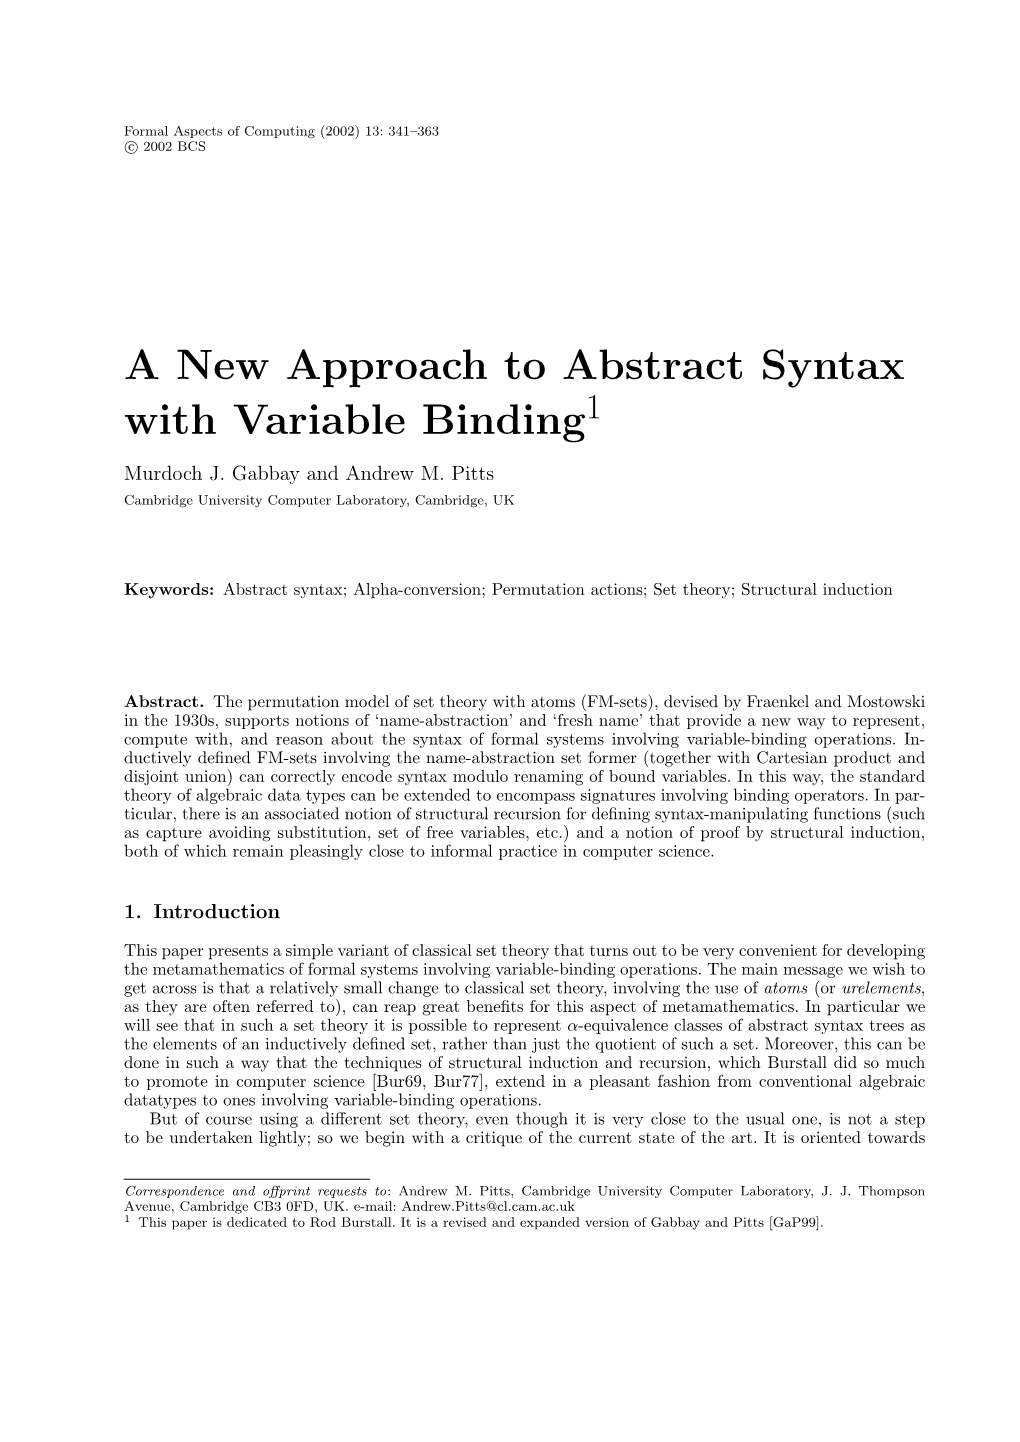 A New Approach to Abstract Syntax with Variable Binding1